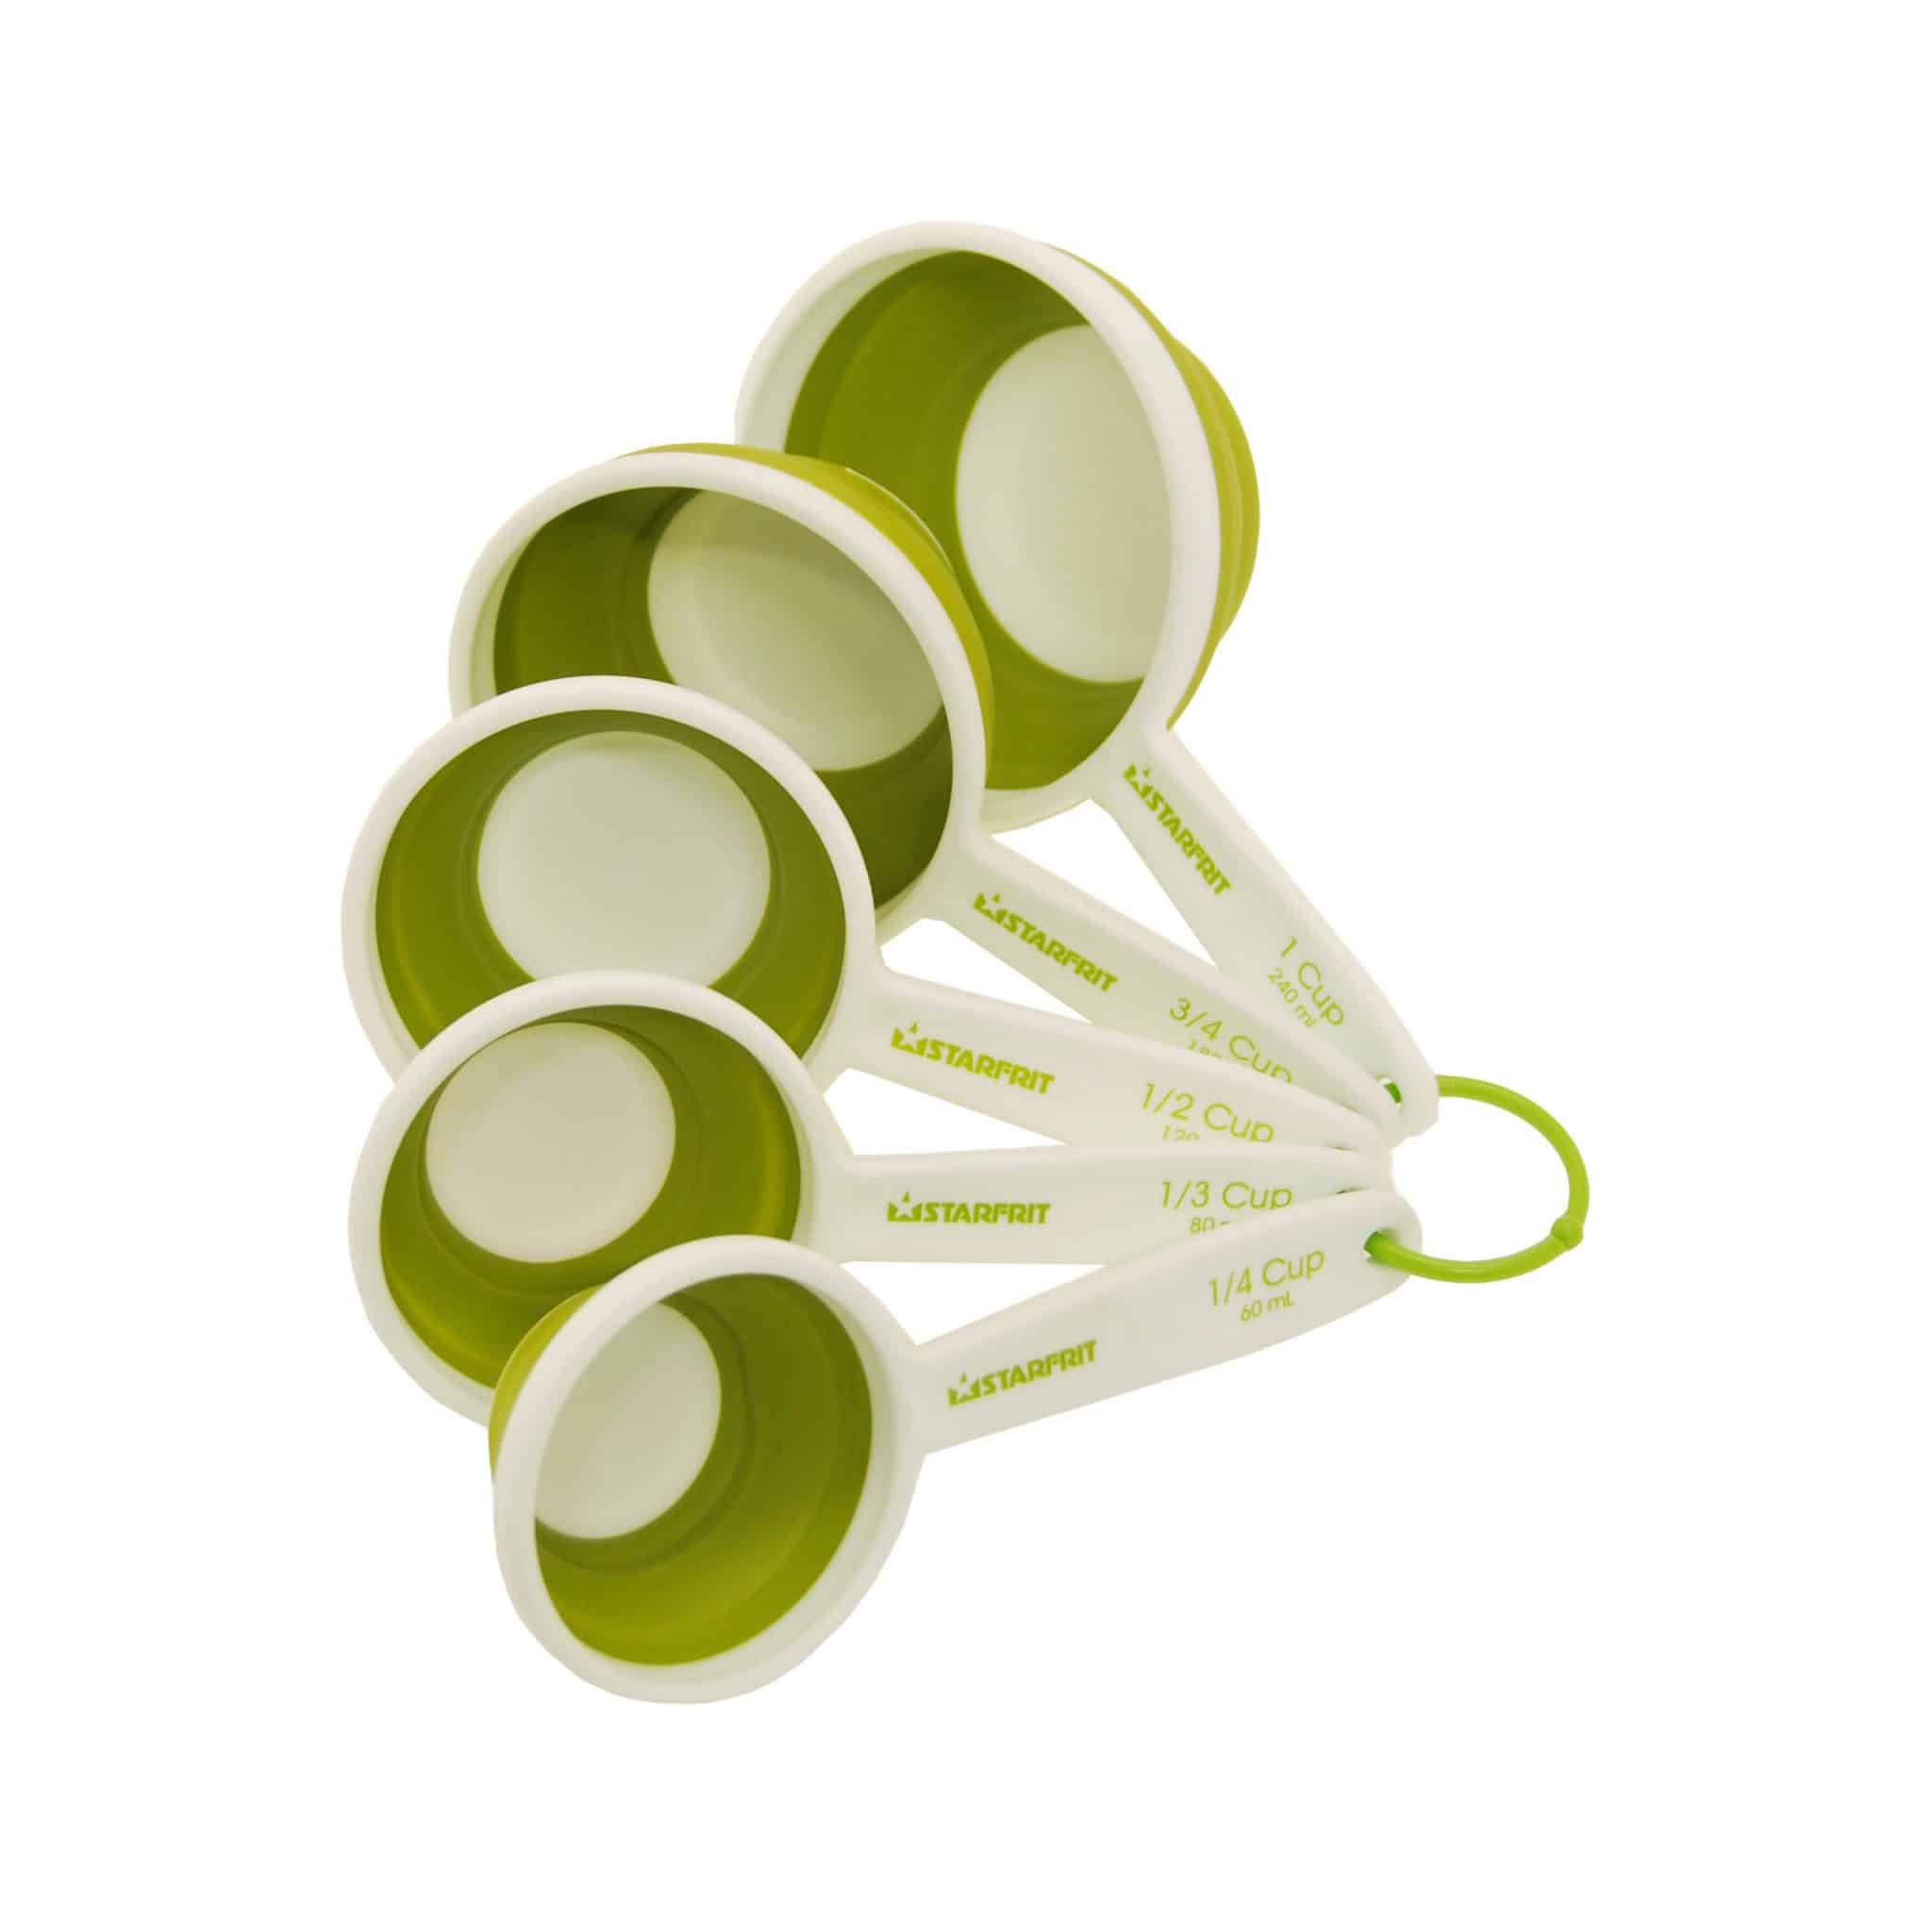 93130 - Collapsible Measuring Cups.wt storage ring2012